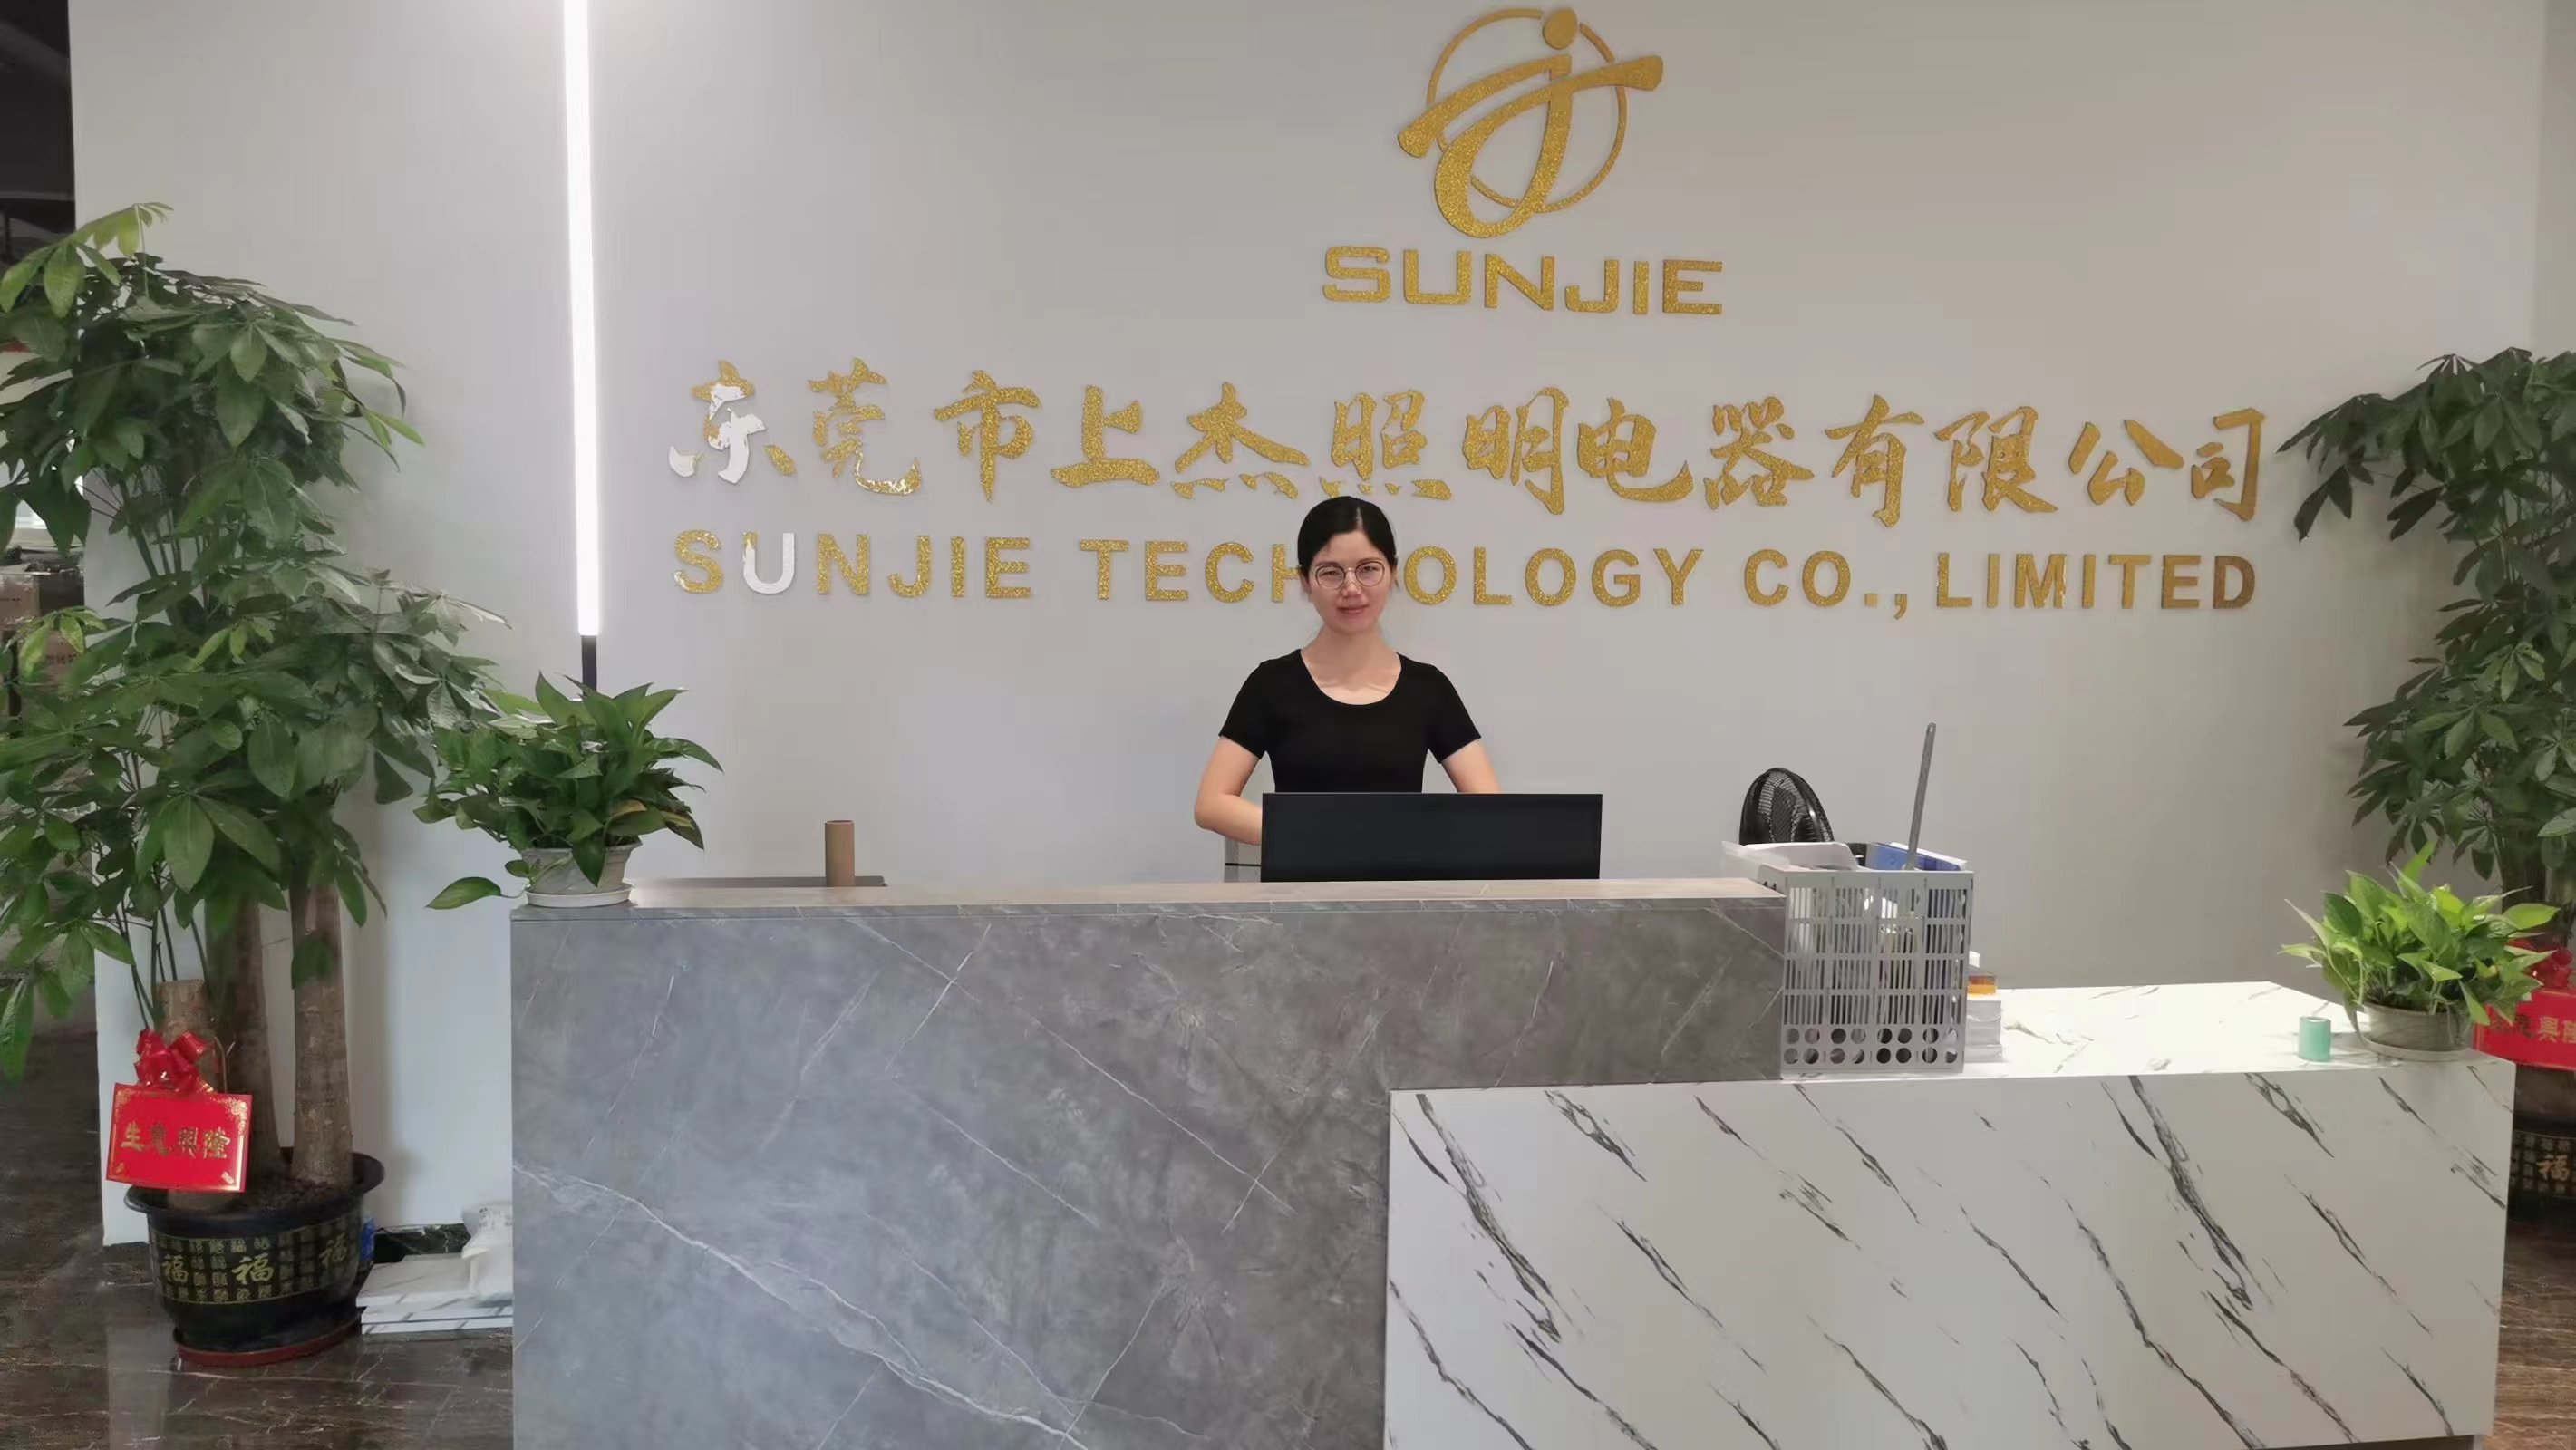 Sunjie Technology Co., Limited